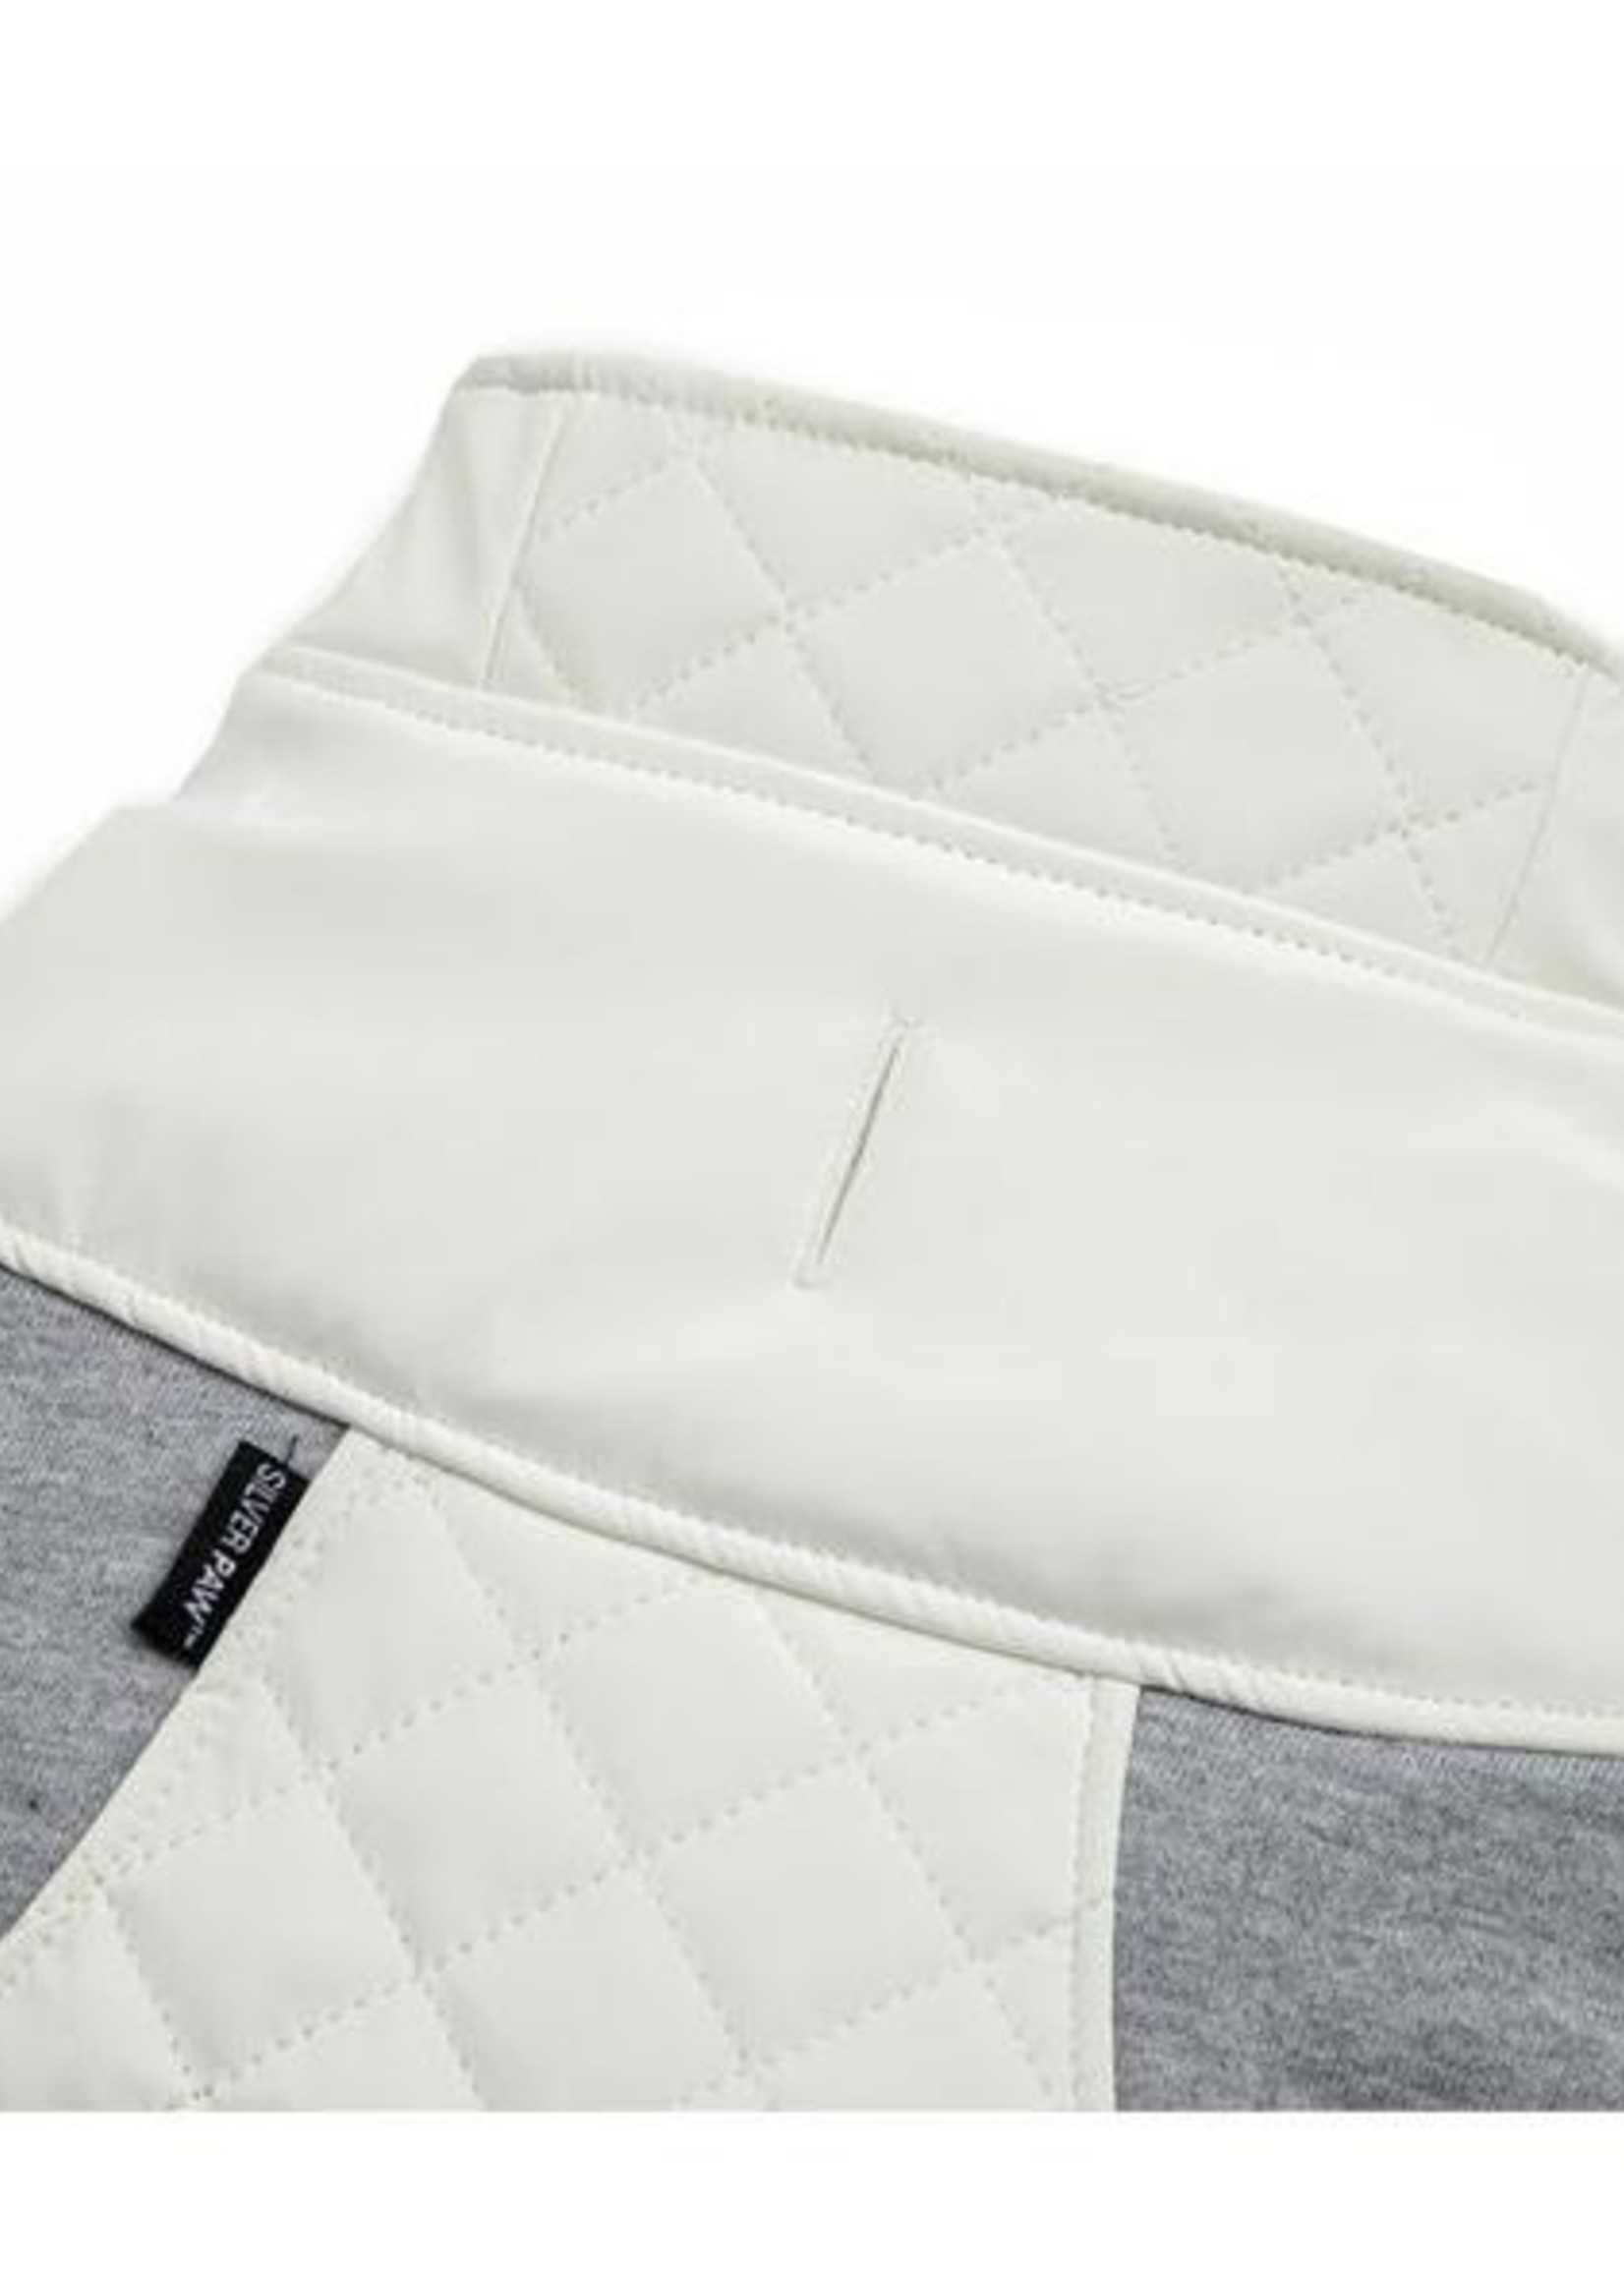 Silver Paw Silver Paw - Quilted Jacket Faux Leather White/Grey